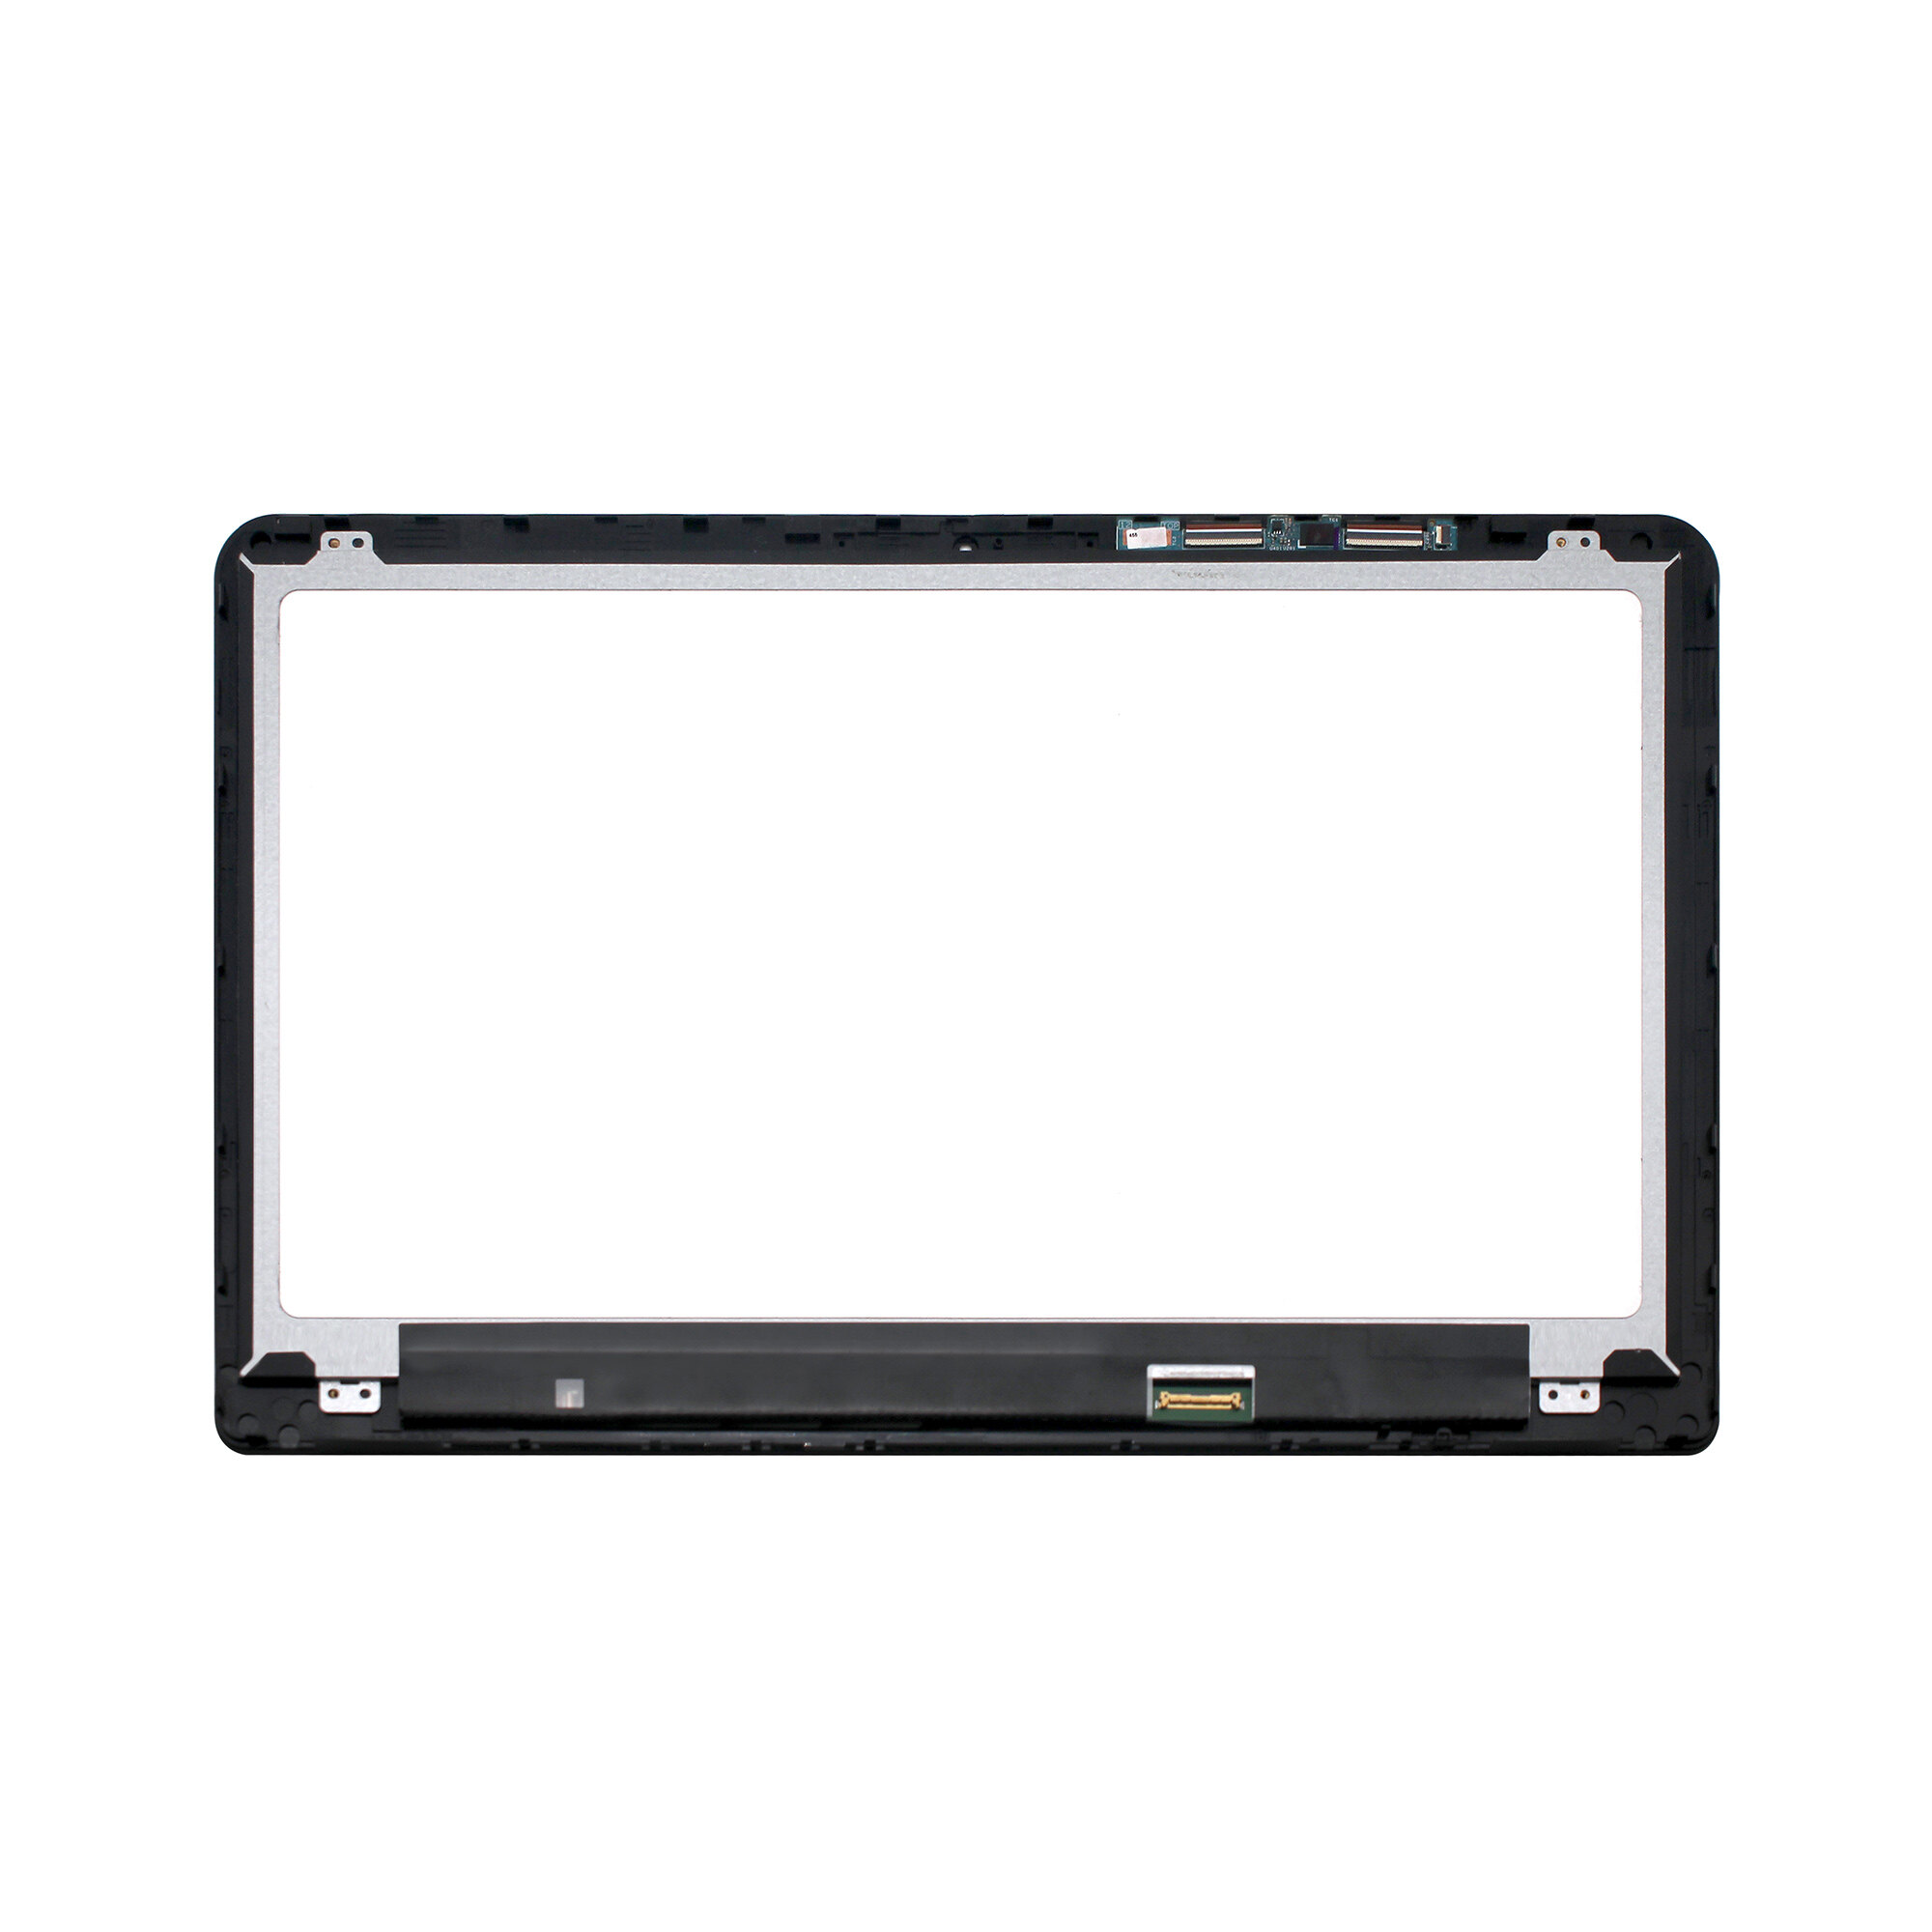 Kreplacement 15.6" LCD Touch Screen Digitizer Asssembly for HP ENVY X360 M6-W010dx M6-W011dx